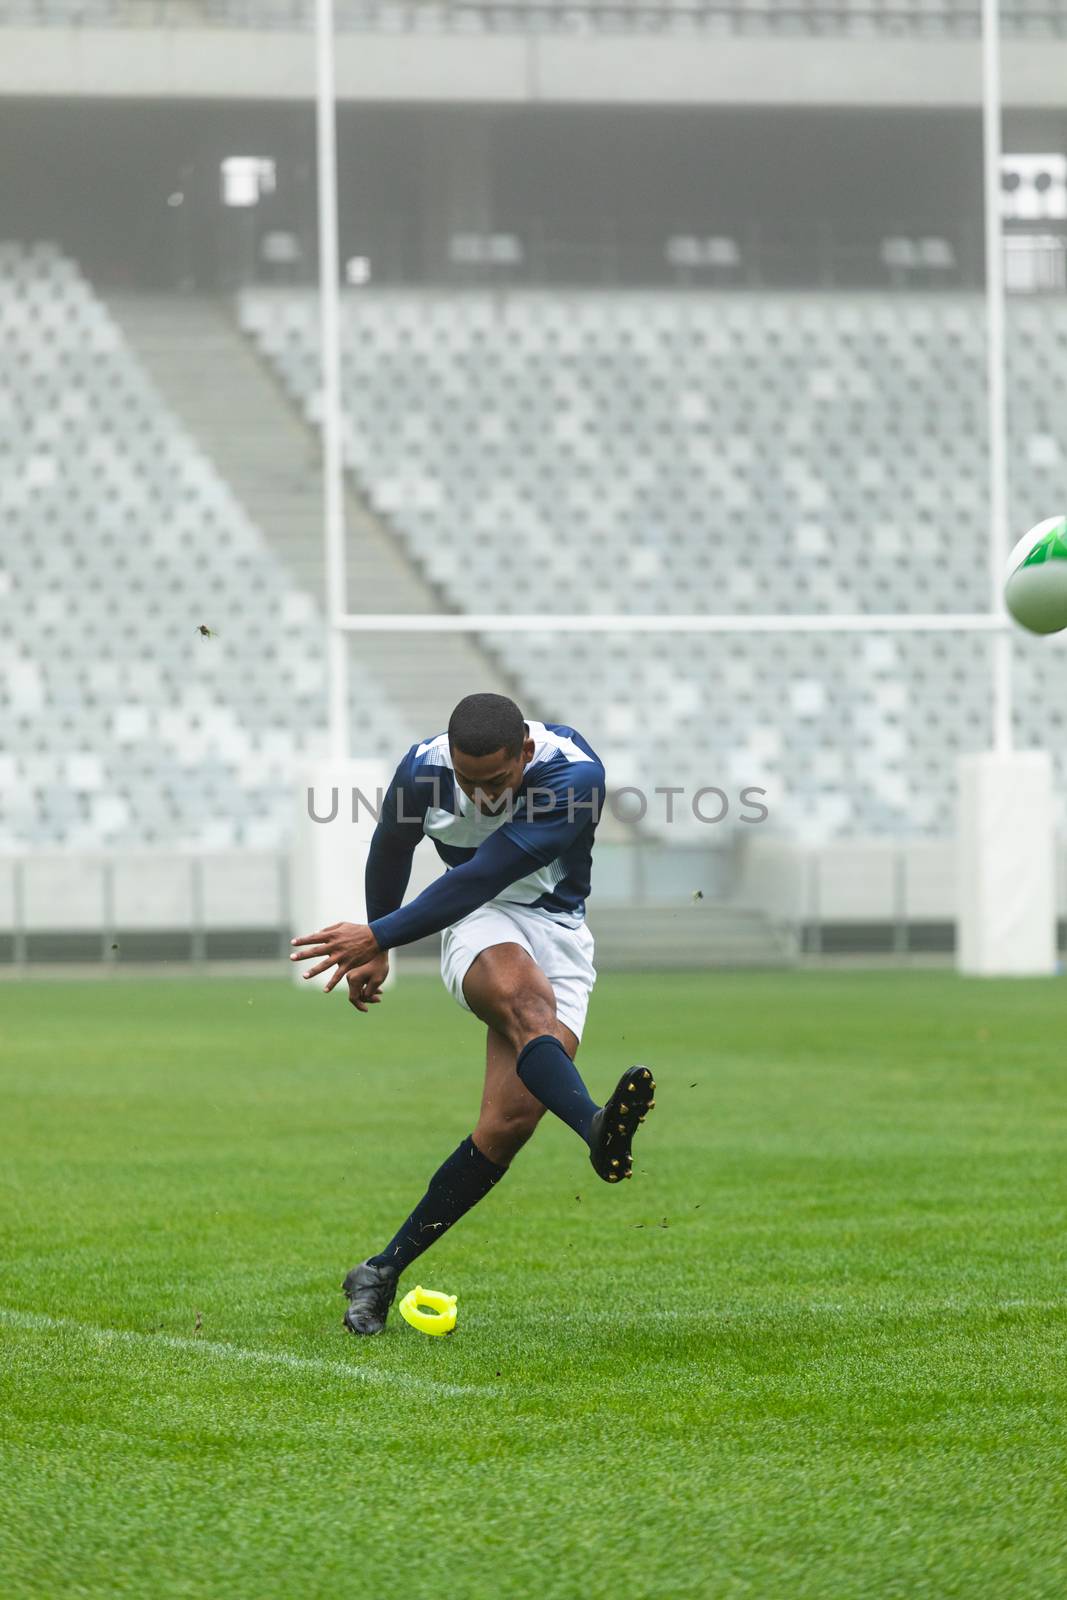 Front view of African American male rugby player kicking rugby ball in stadium